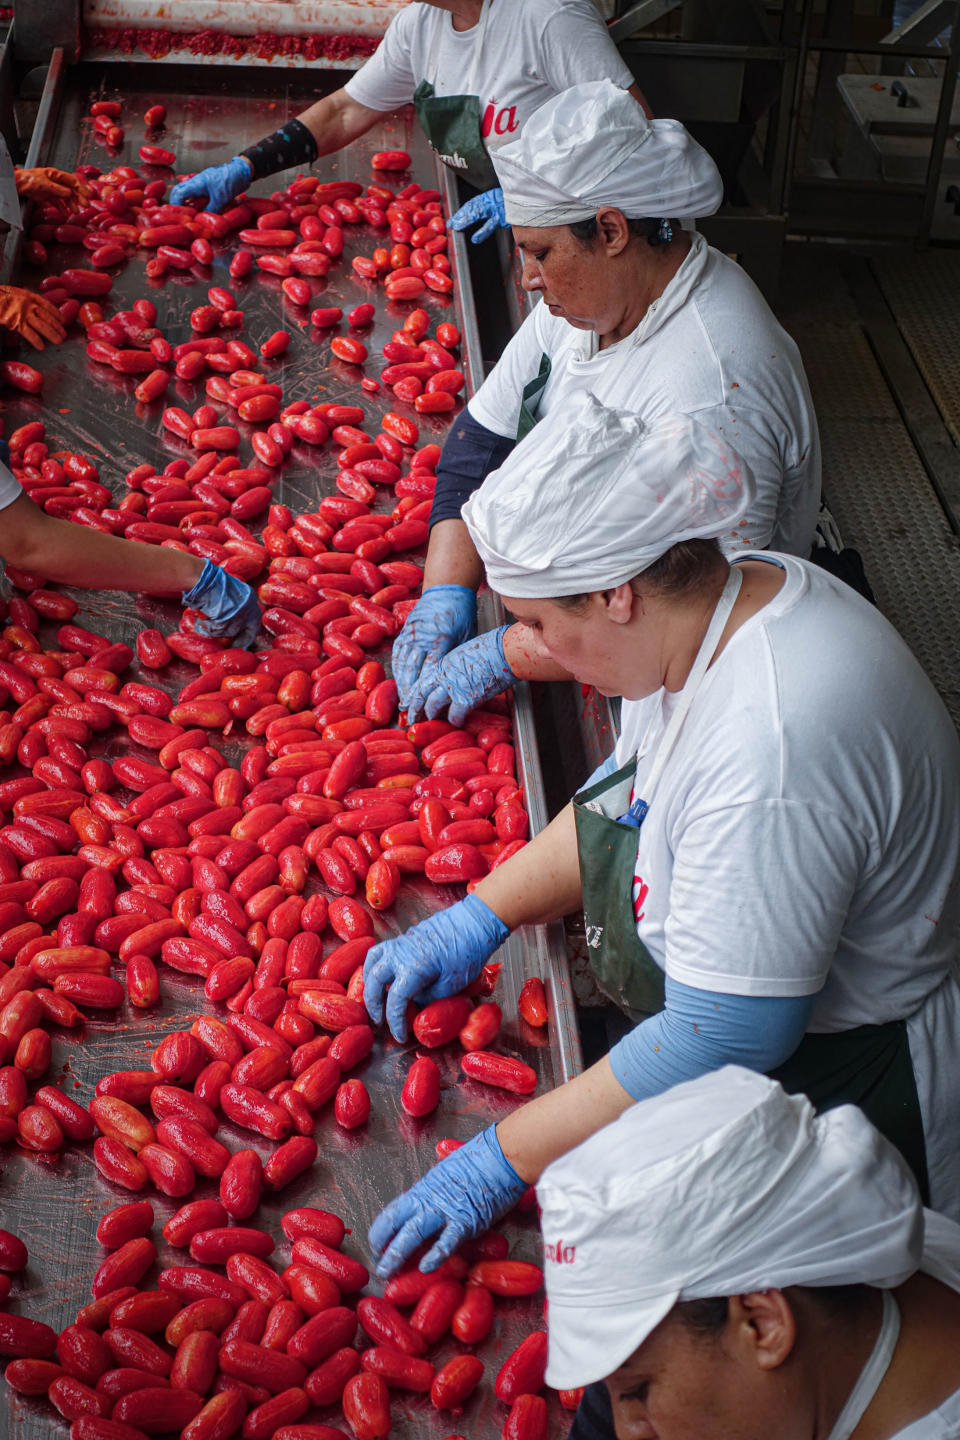 The tomatoes go through many quality control checks. Any imperfect tomatoes are removed right before canning. (Courtesy Anthony Contrino)